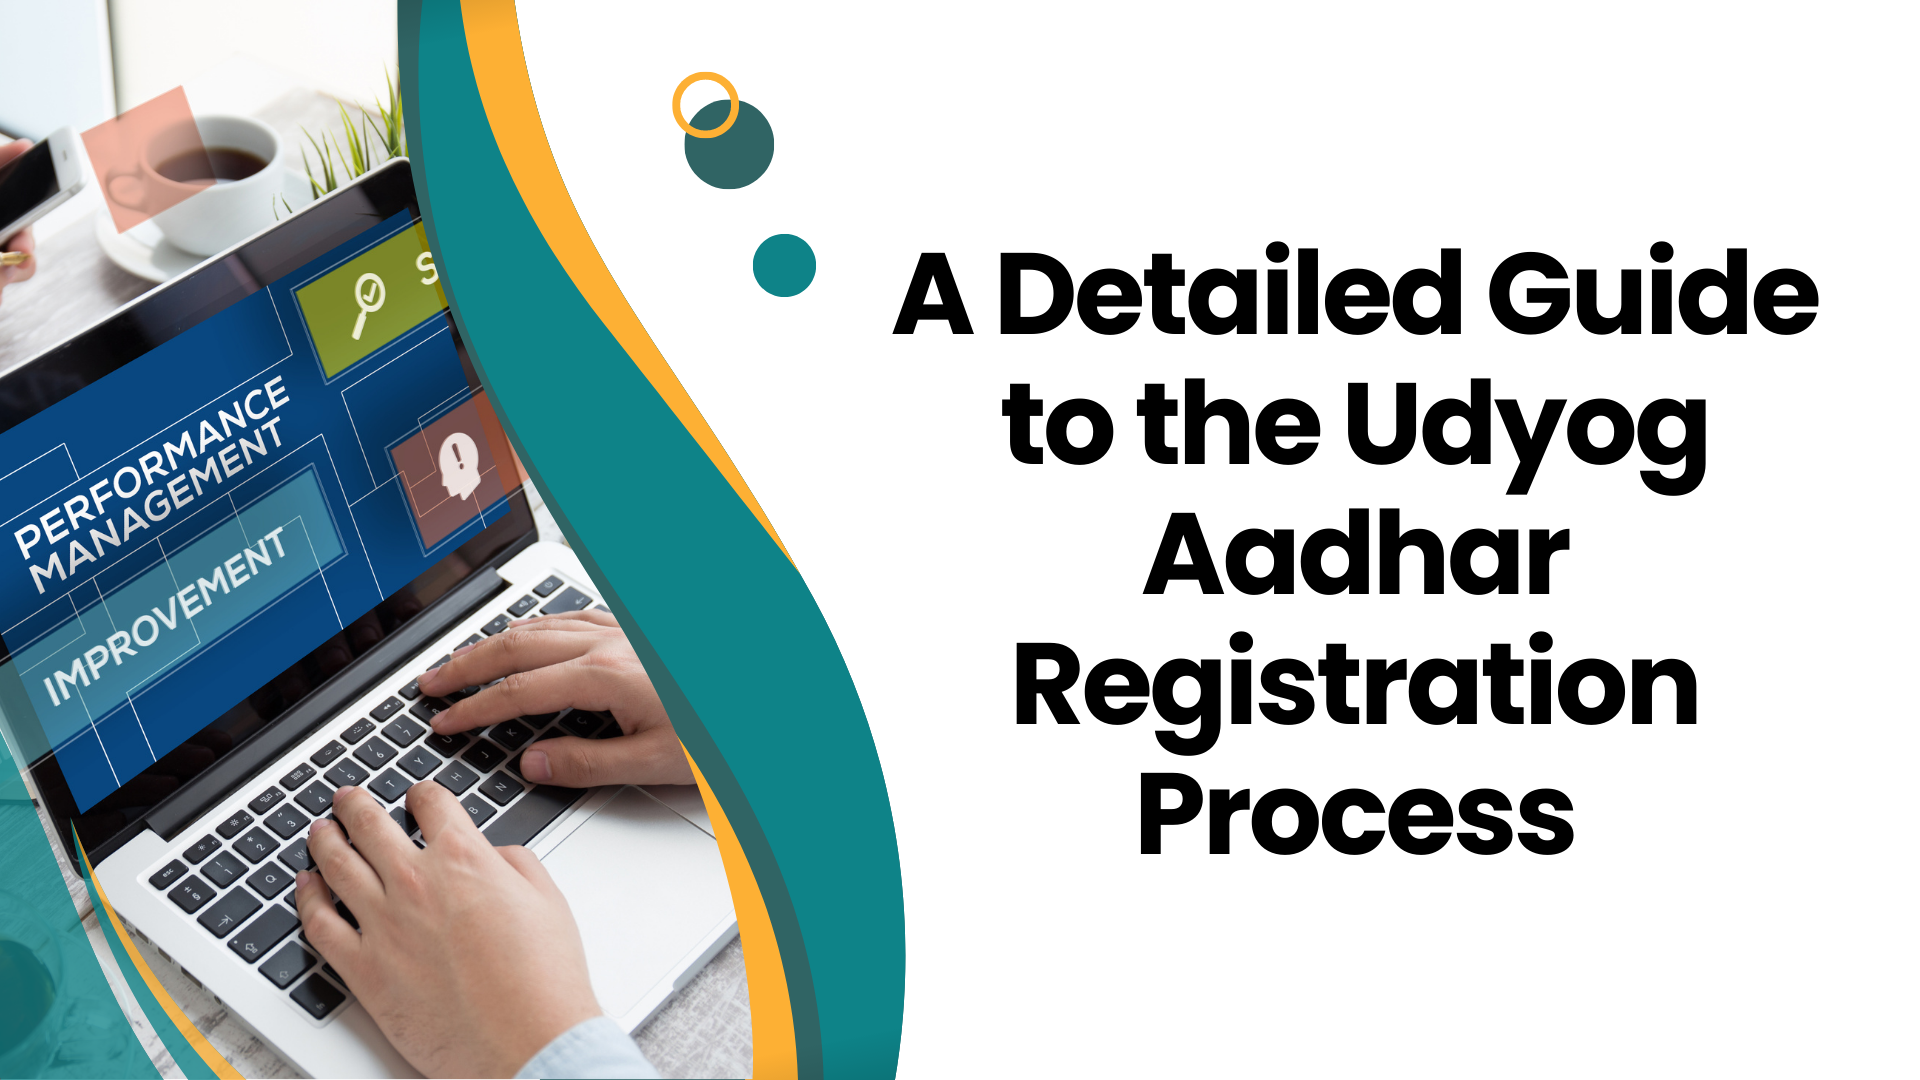 A Detailed Guide to the Udyog Aadhar Registration Process